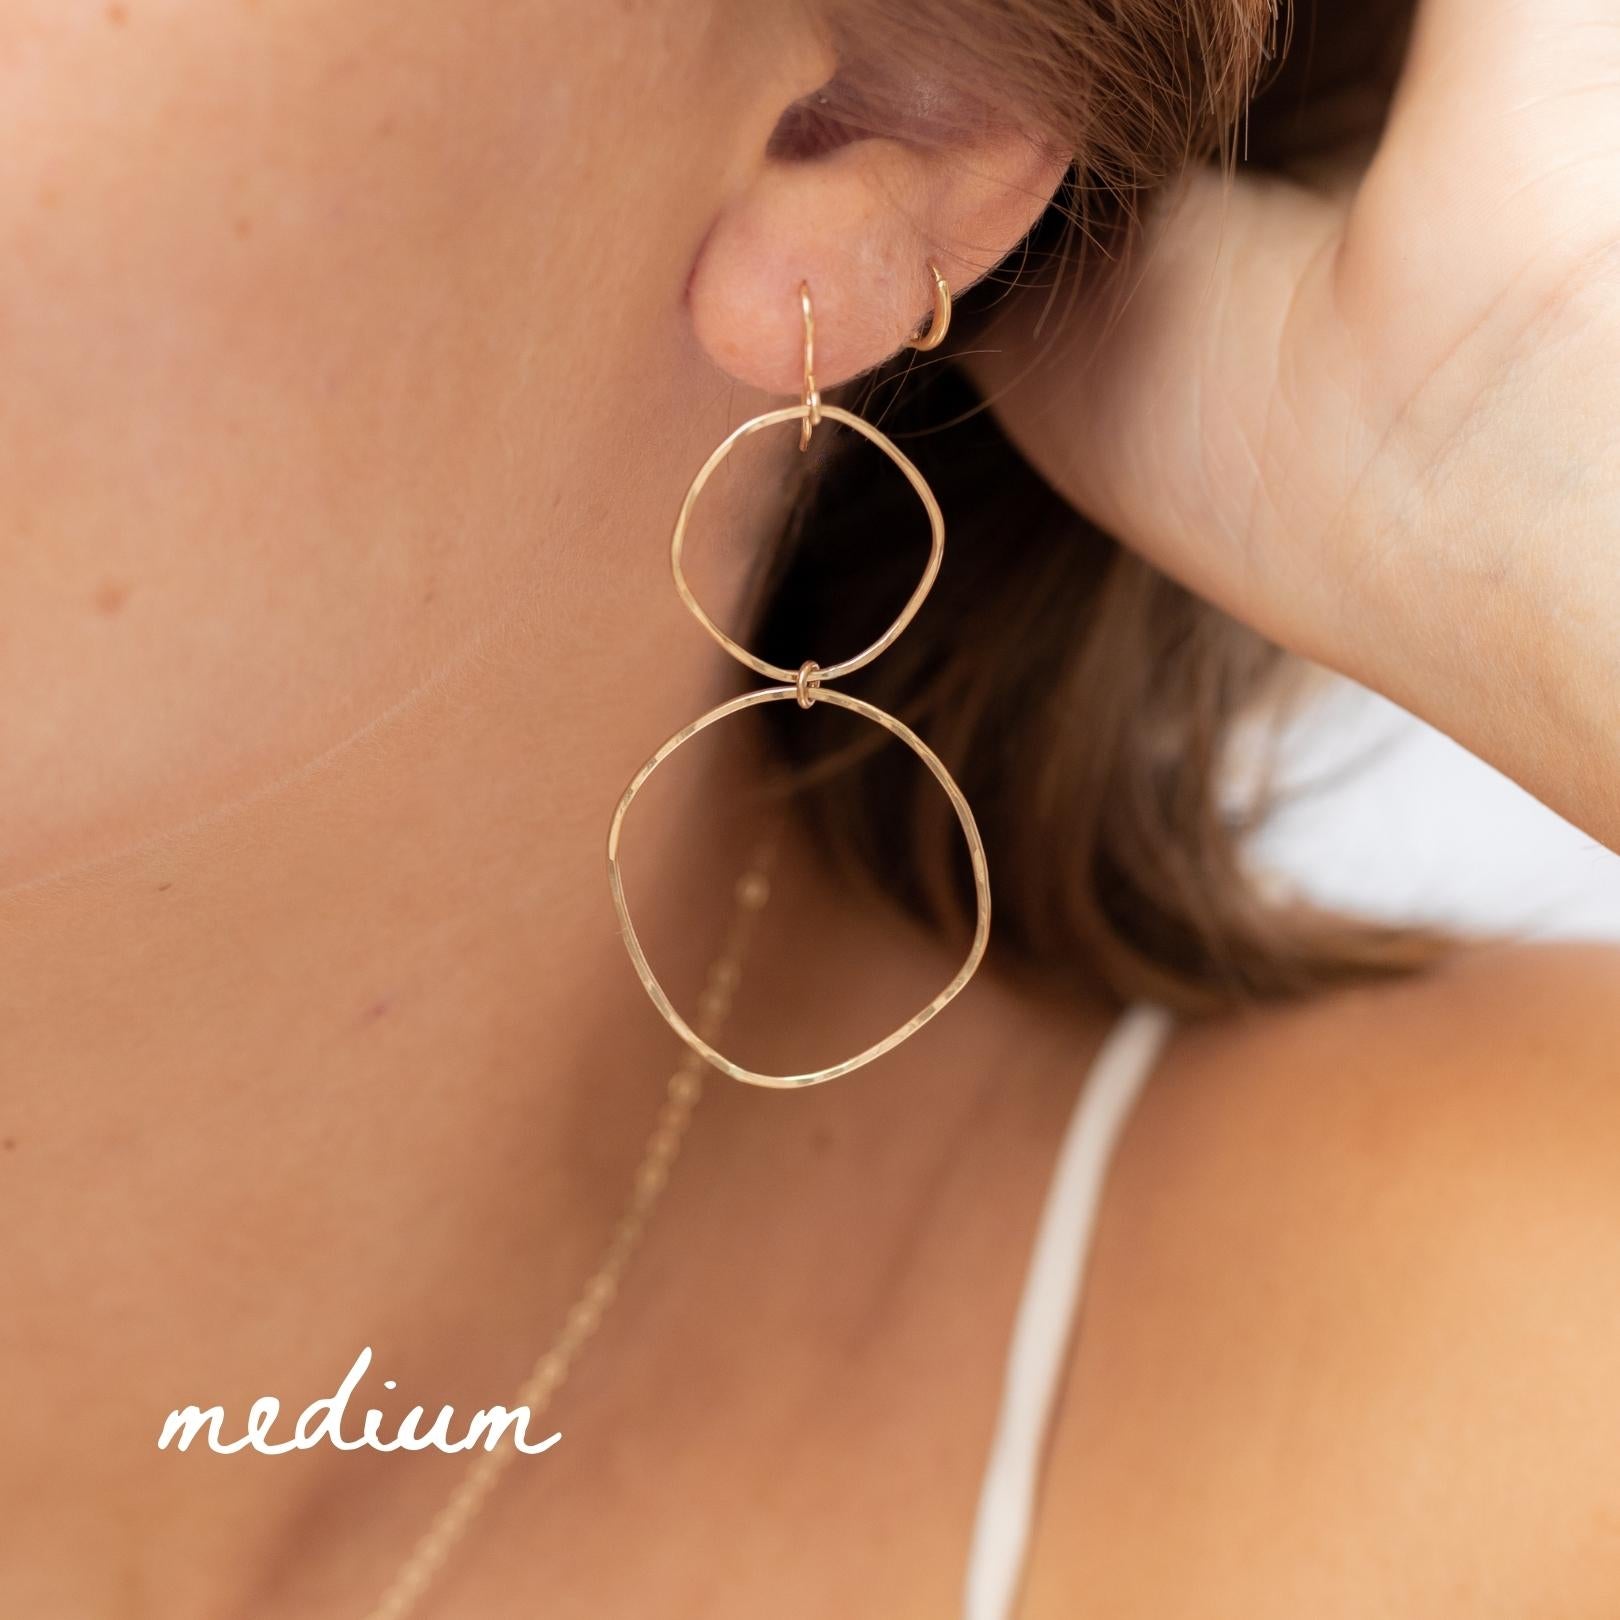 Hammered gold filled double hoop earrings. Three different sizes. medium: about 2.5 inches. Shown in a woman's ear.